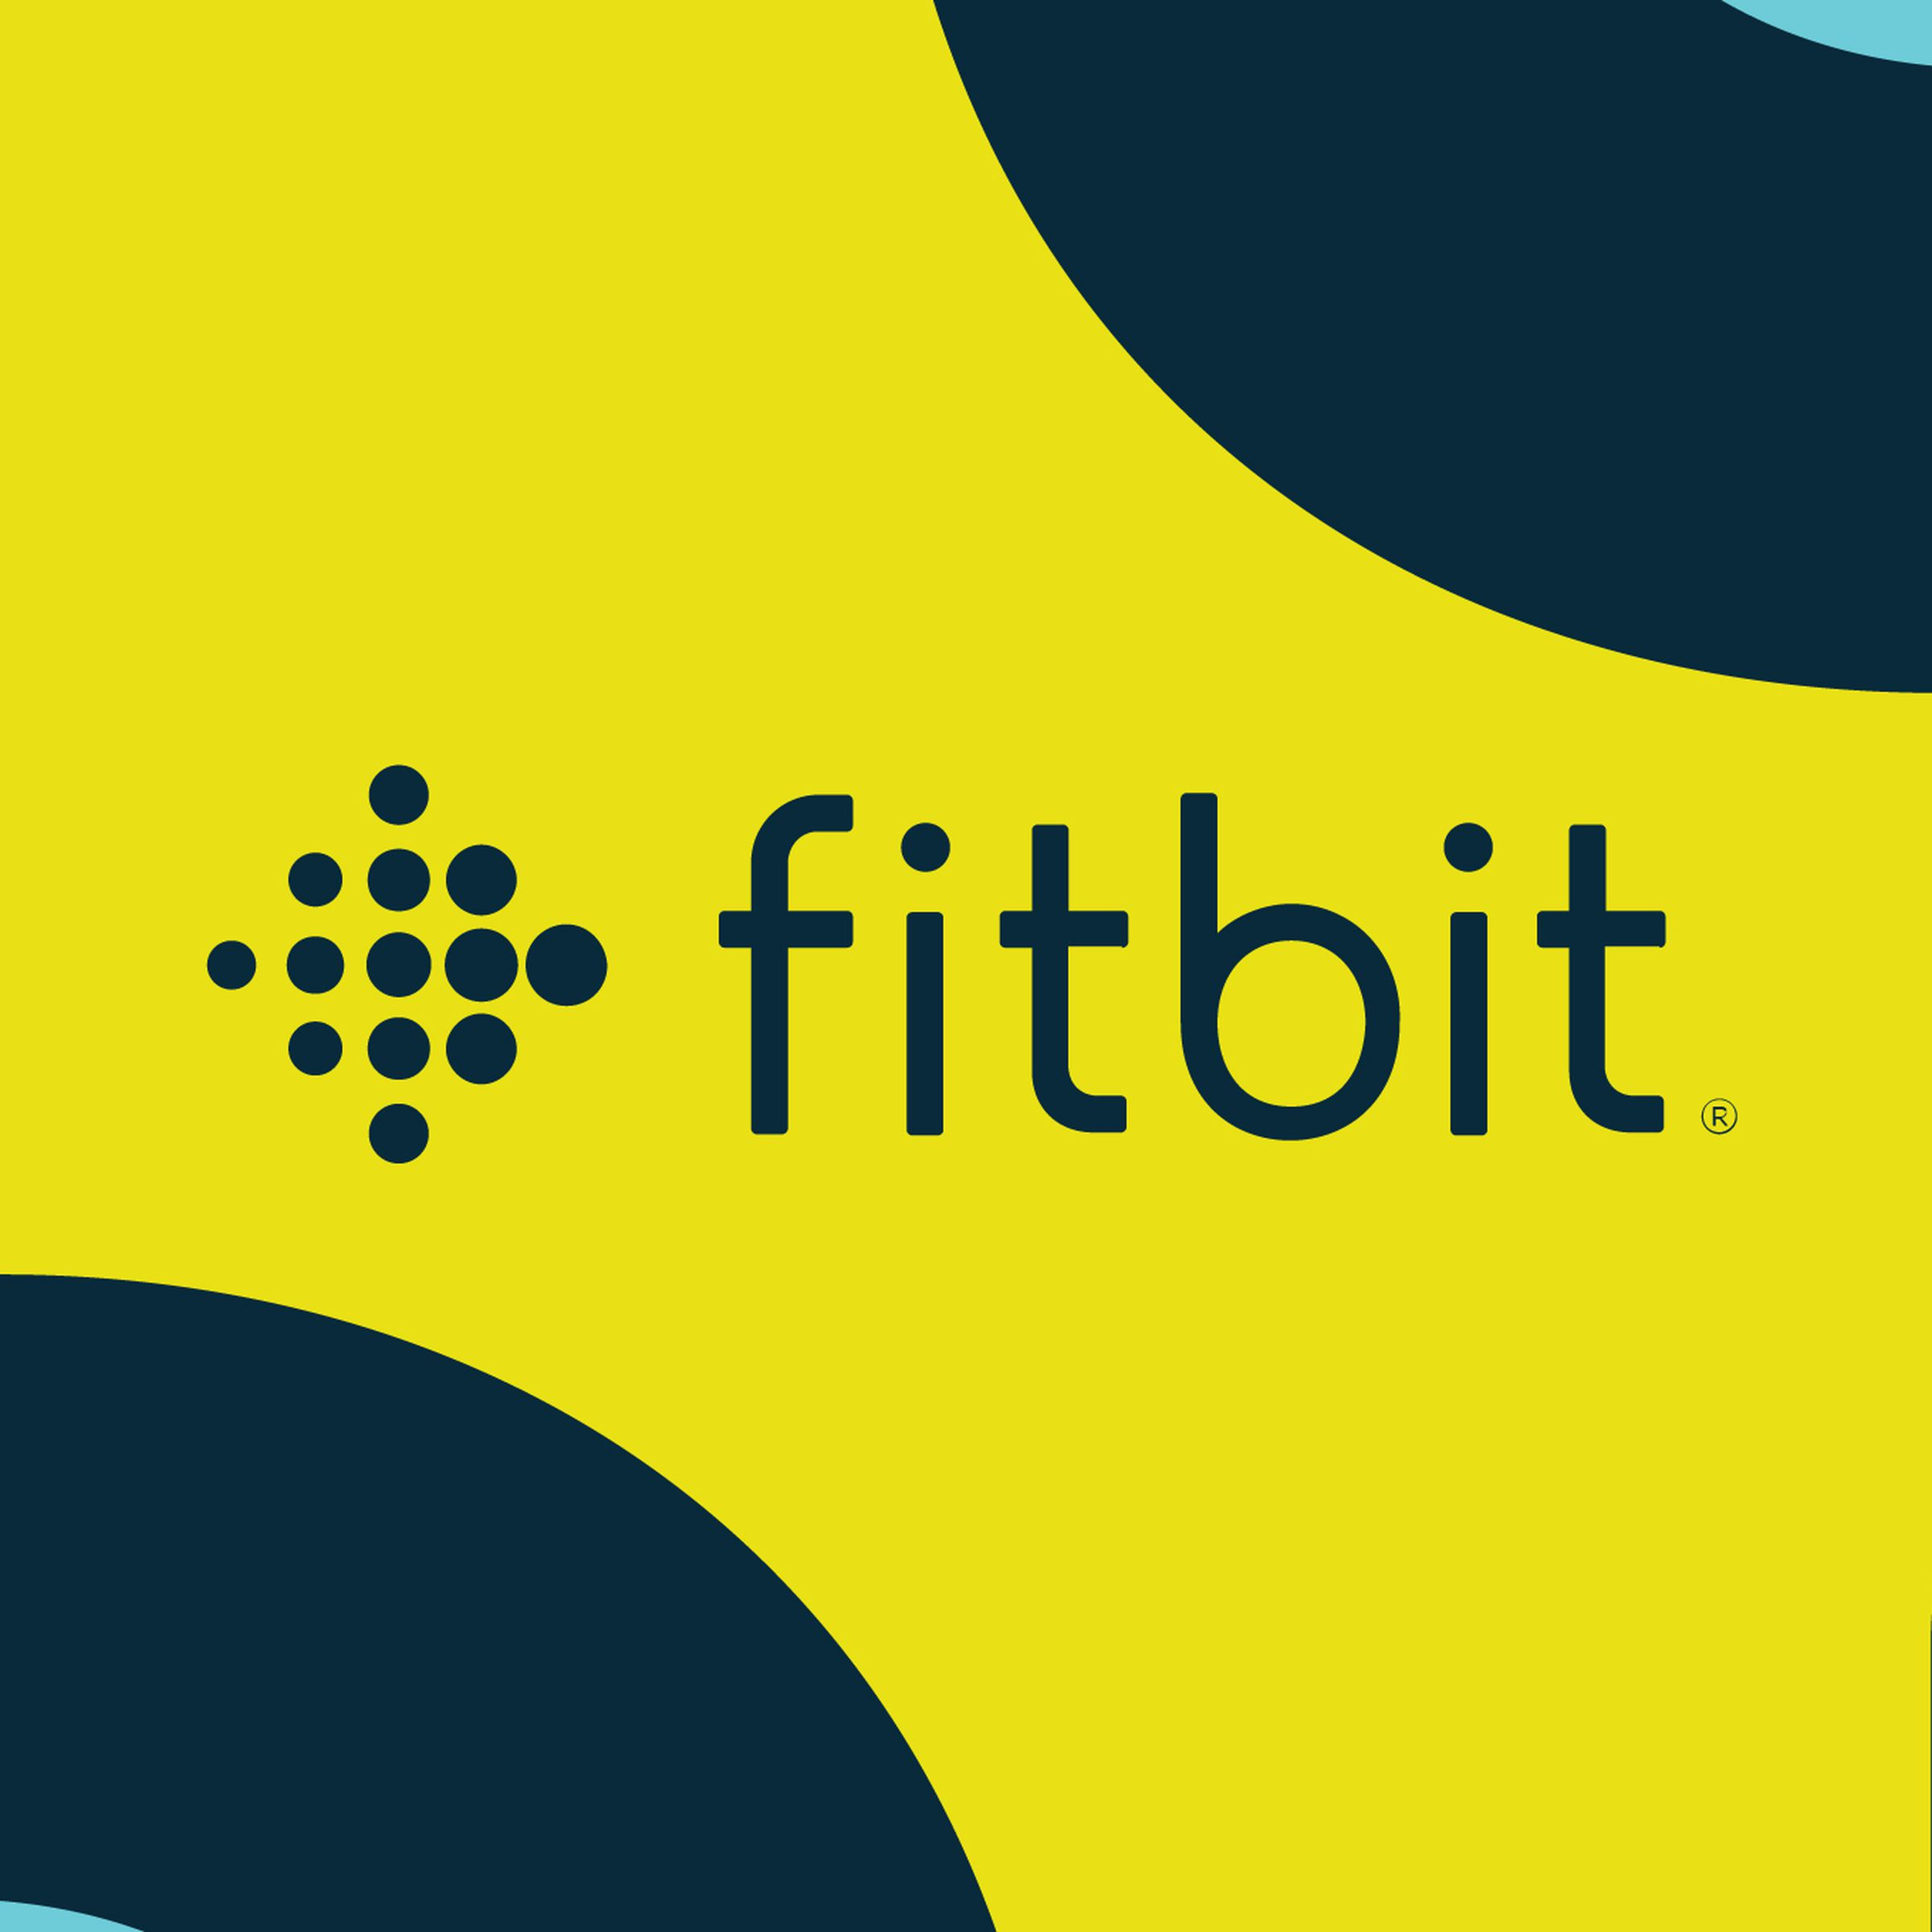 Graphic of the Fitbit logo